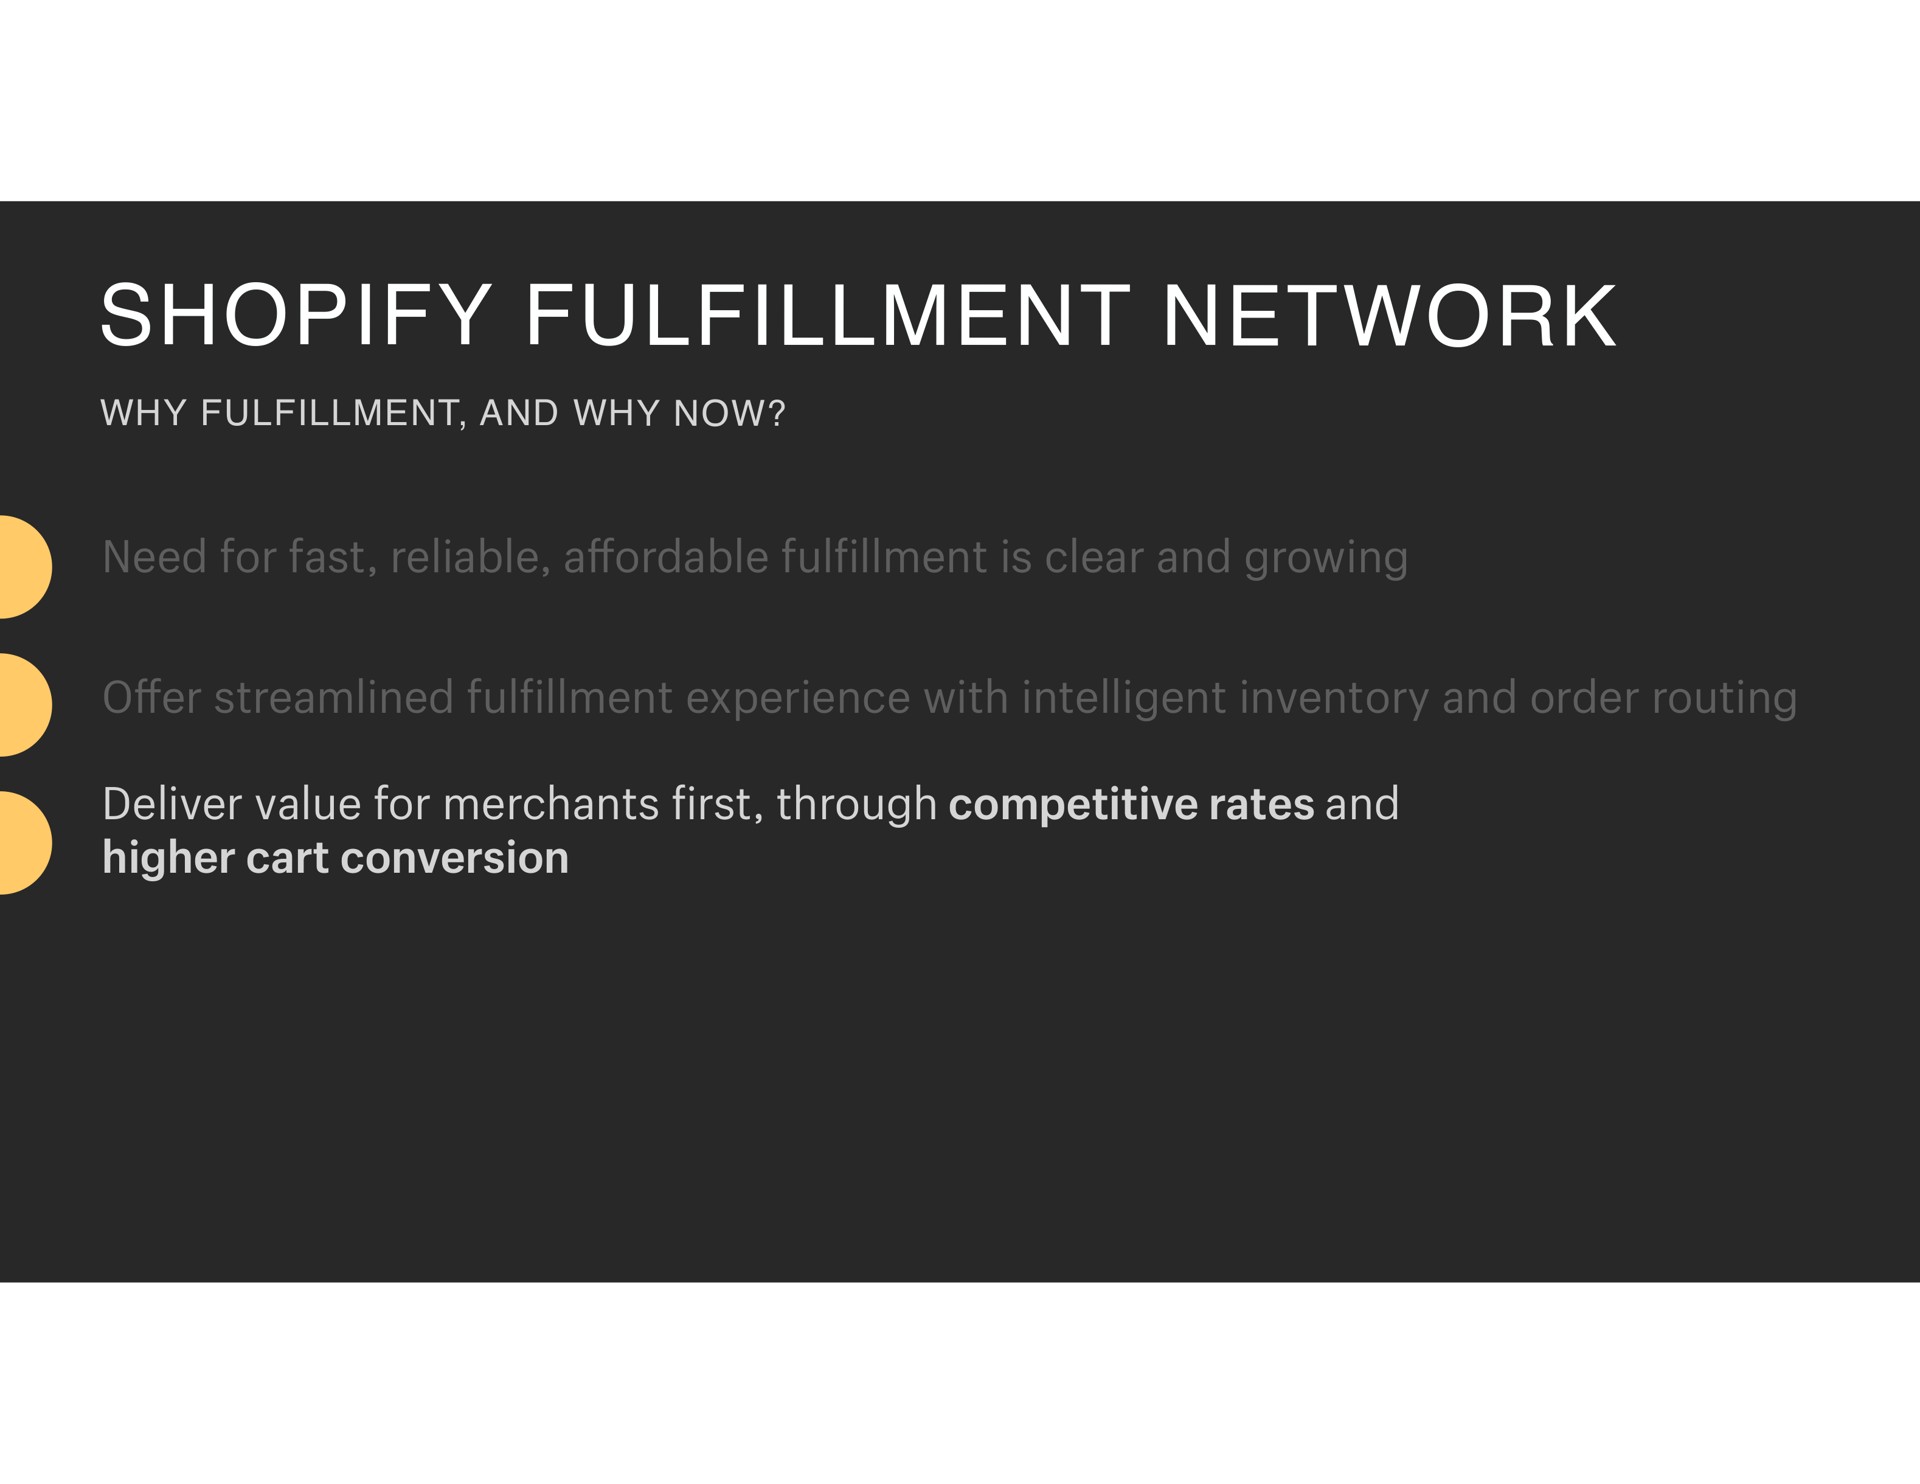 fulfillment network need for fast reliable affordable fulfillment is clear and growing offer streamlined fulfillment experience with intelligent inventory and order routing deliver value for merchants first through competitive rates and higher cart conversion | Shopify